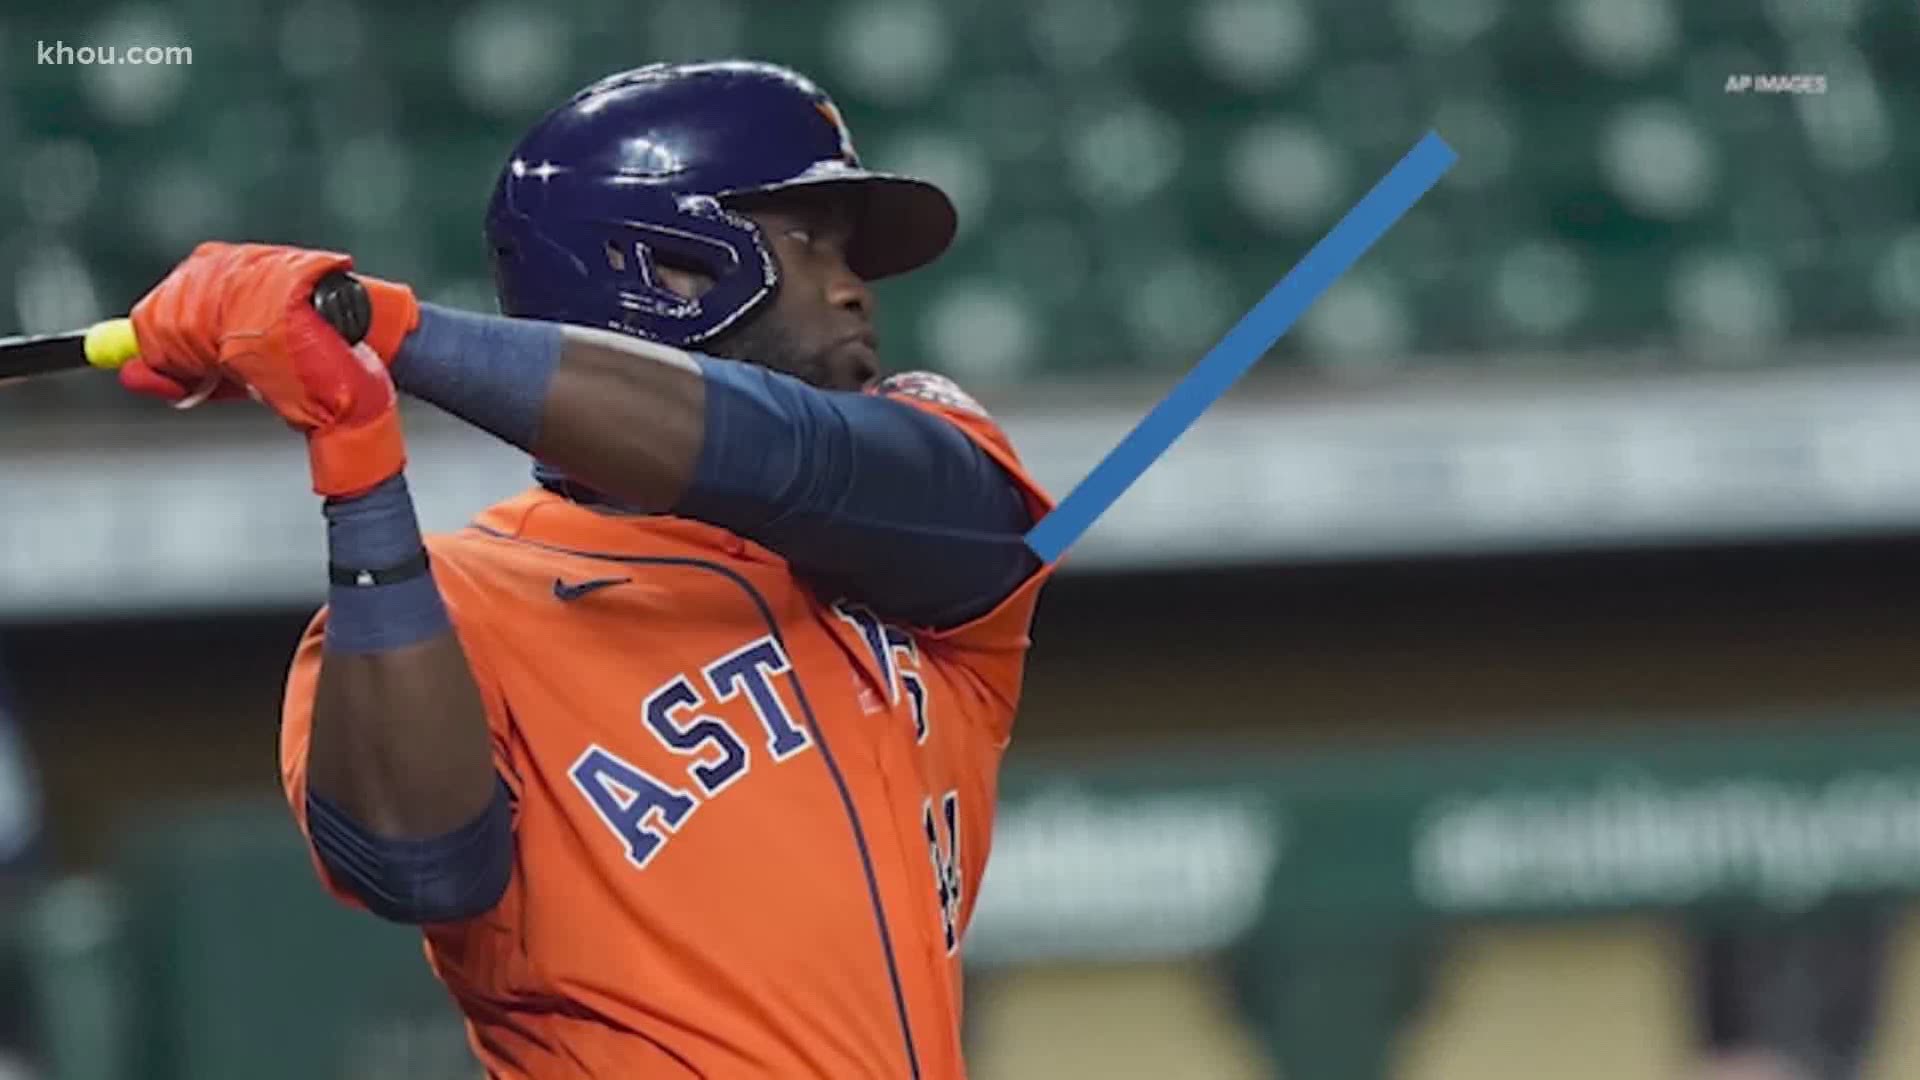 The Houston Astros' Yordan Alvarez needs knee surgery and is out for the season, plus the Dynamo will play for the first time in 6 months as they face FC Dallas.